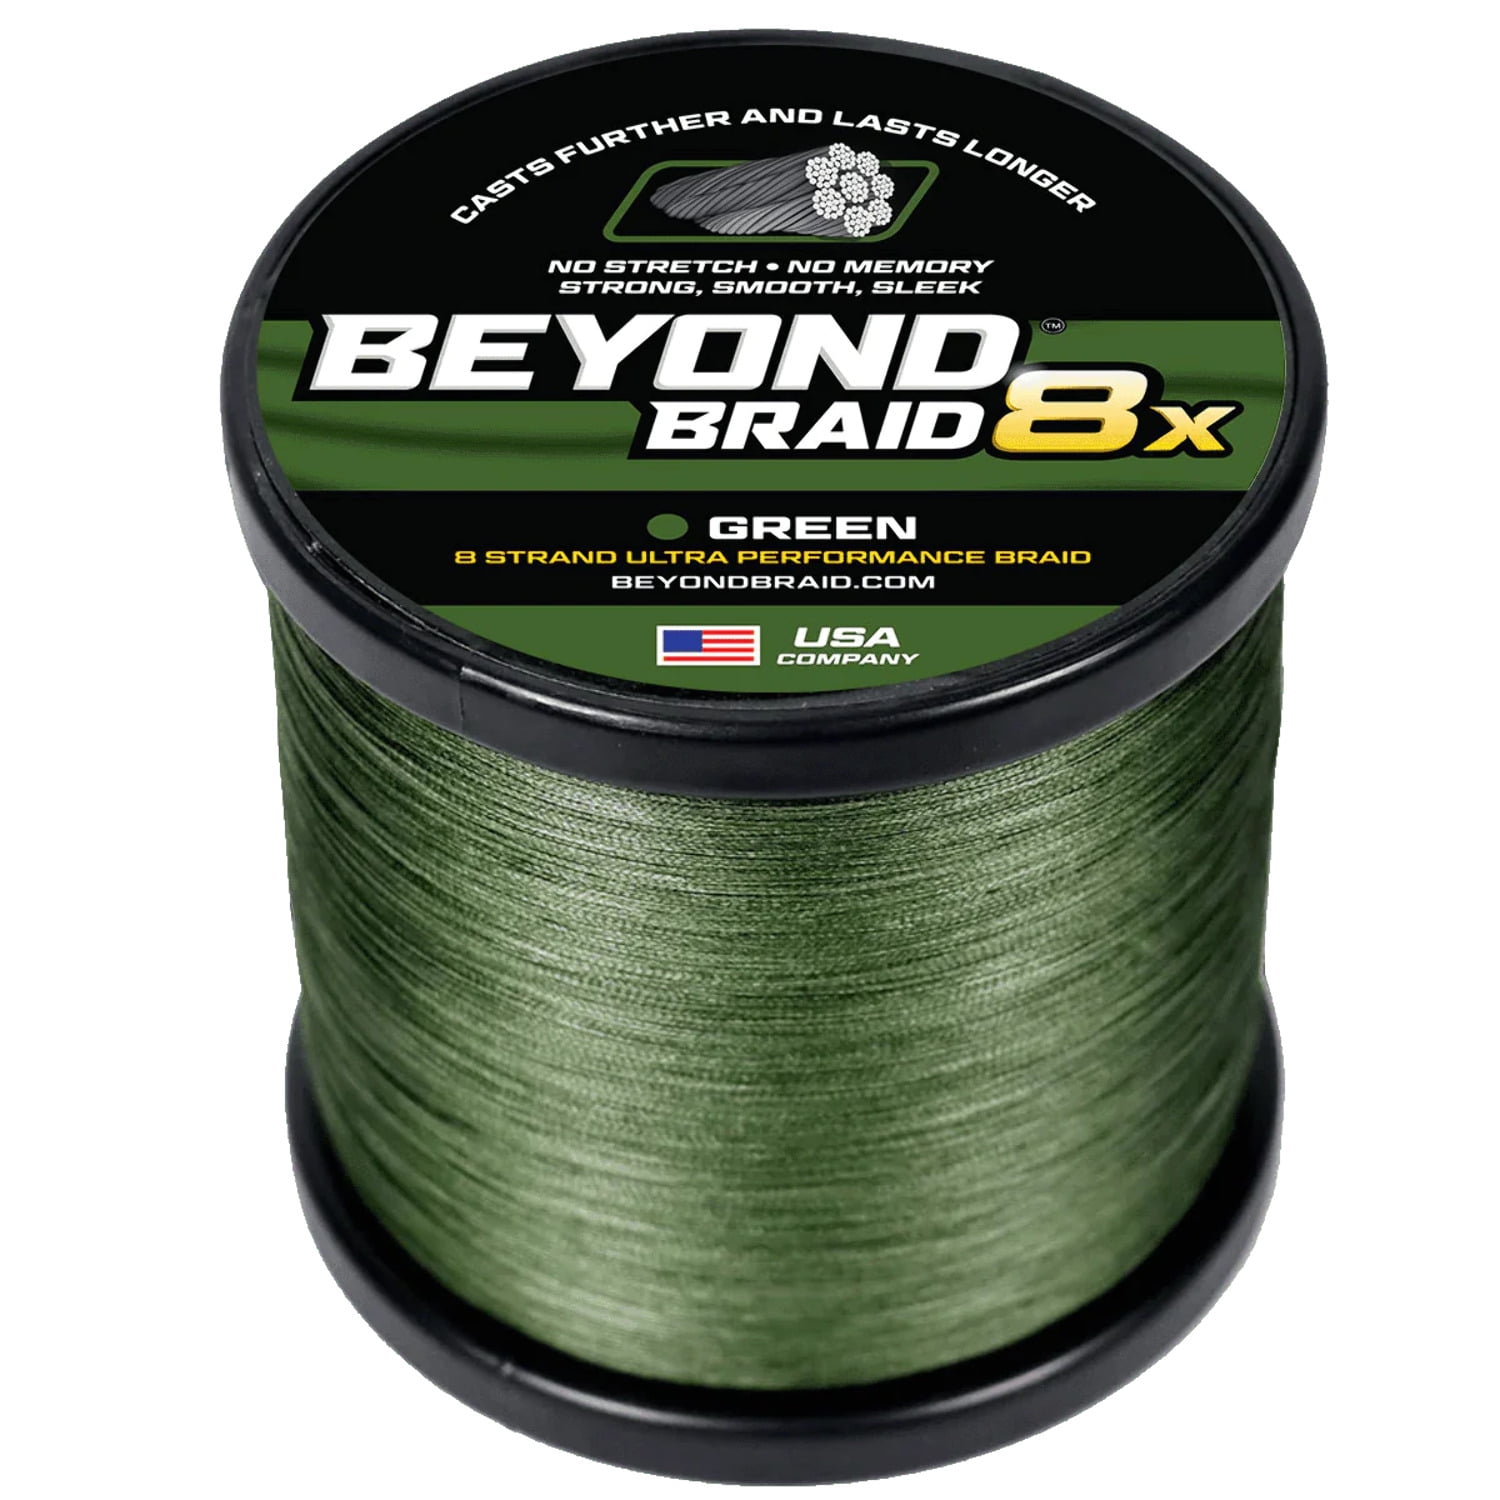 HI-SEAS Grand Slam Braid Fishing Line - No Stretch, Extra Thin, Ultimate  Sensitive Braided Casting Line in Green & Fluorescent Yellow for Saltwater  